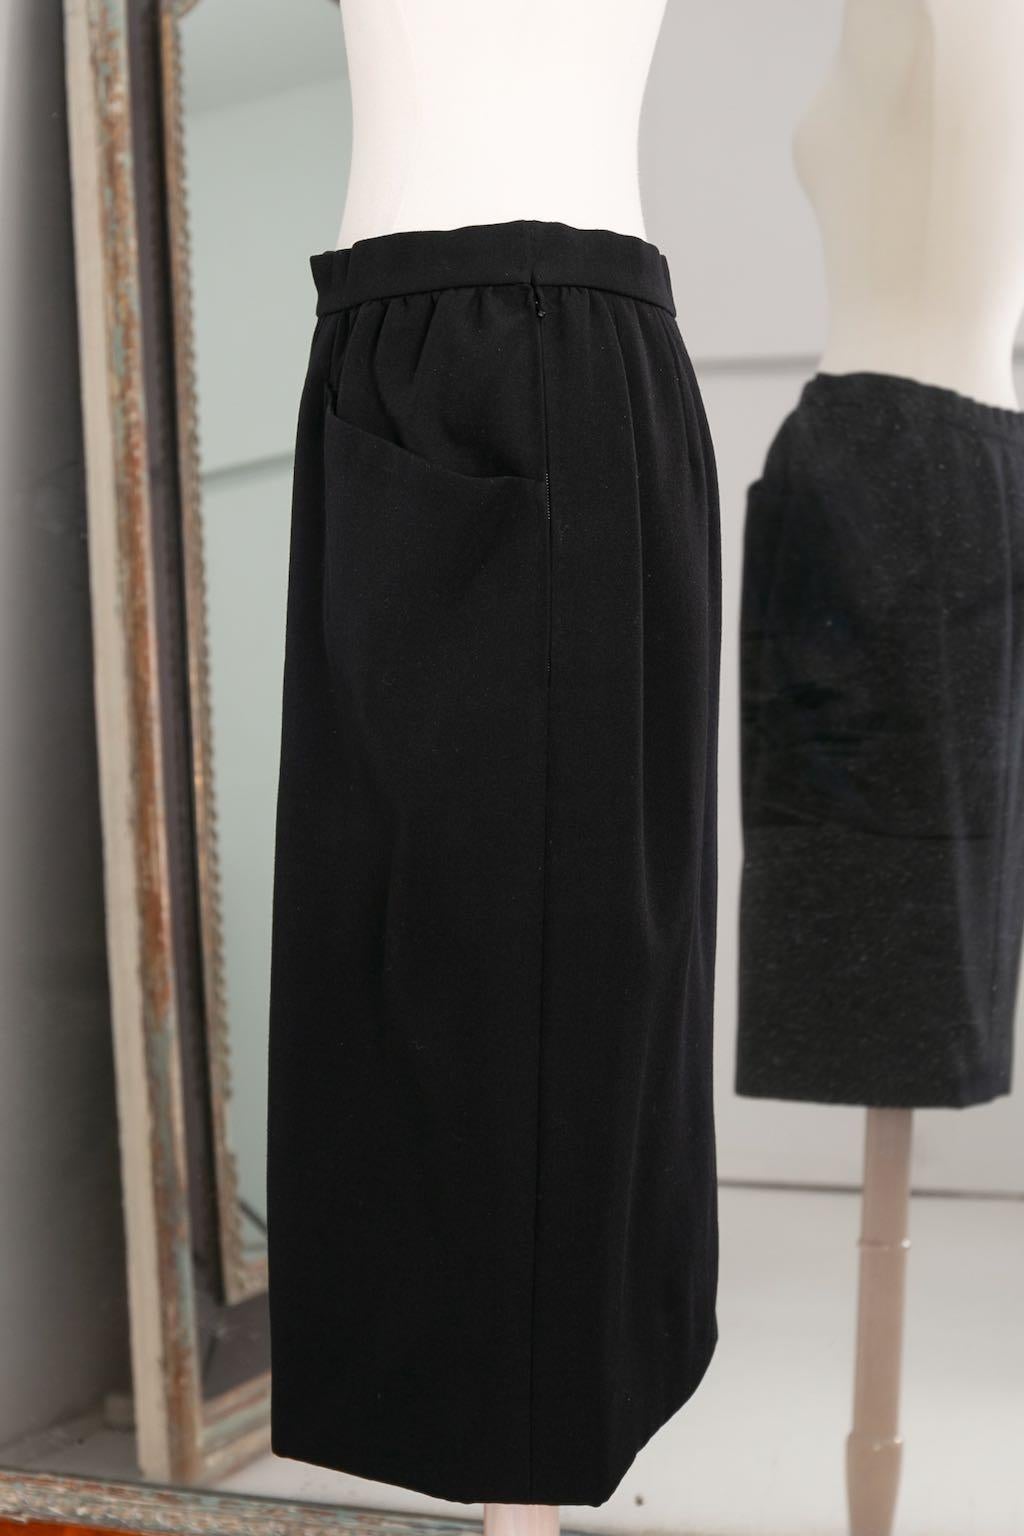 Yves Saint Laurent Haute Couture Black Skirt and Jacket Set, circa 1981/1982 For Sale 4